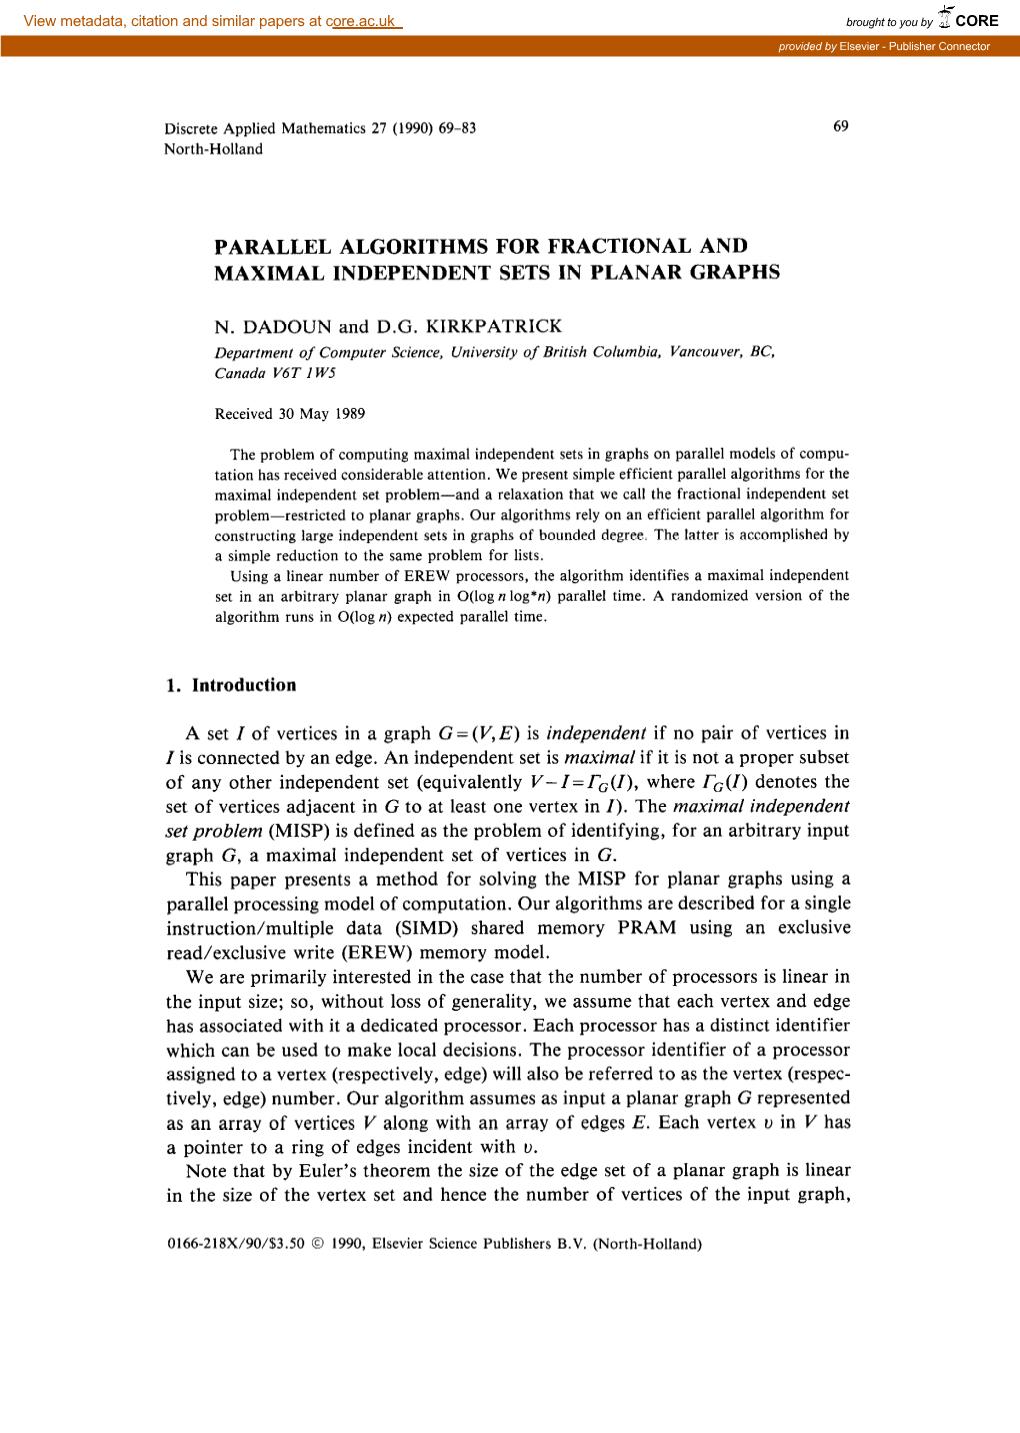 Parallel Algorithms for Fractional and Maximal Independent Sets in Planar Graphs